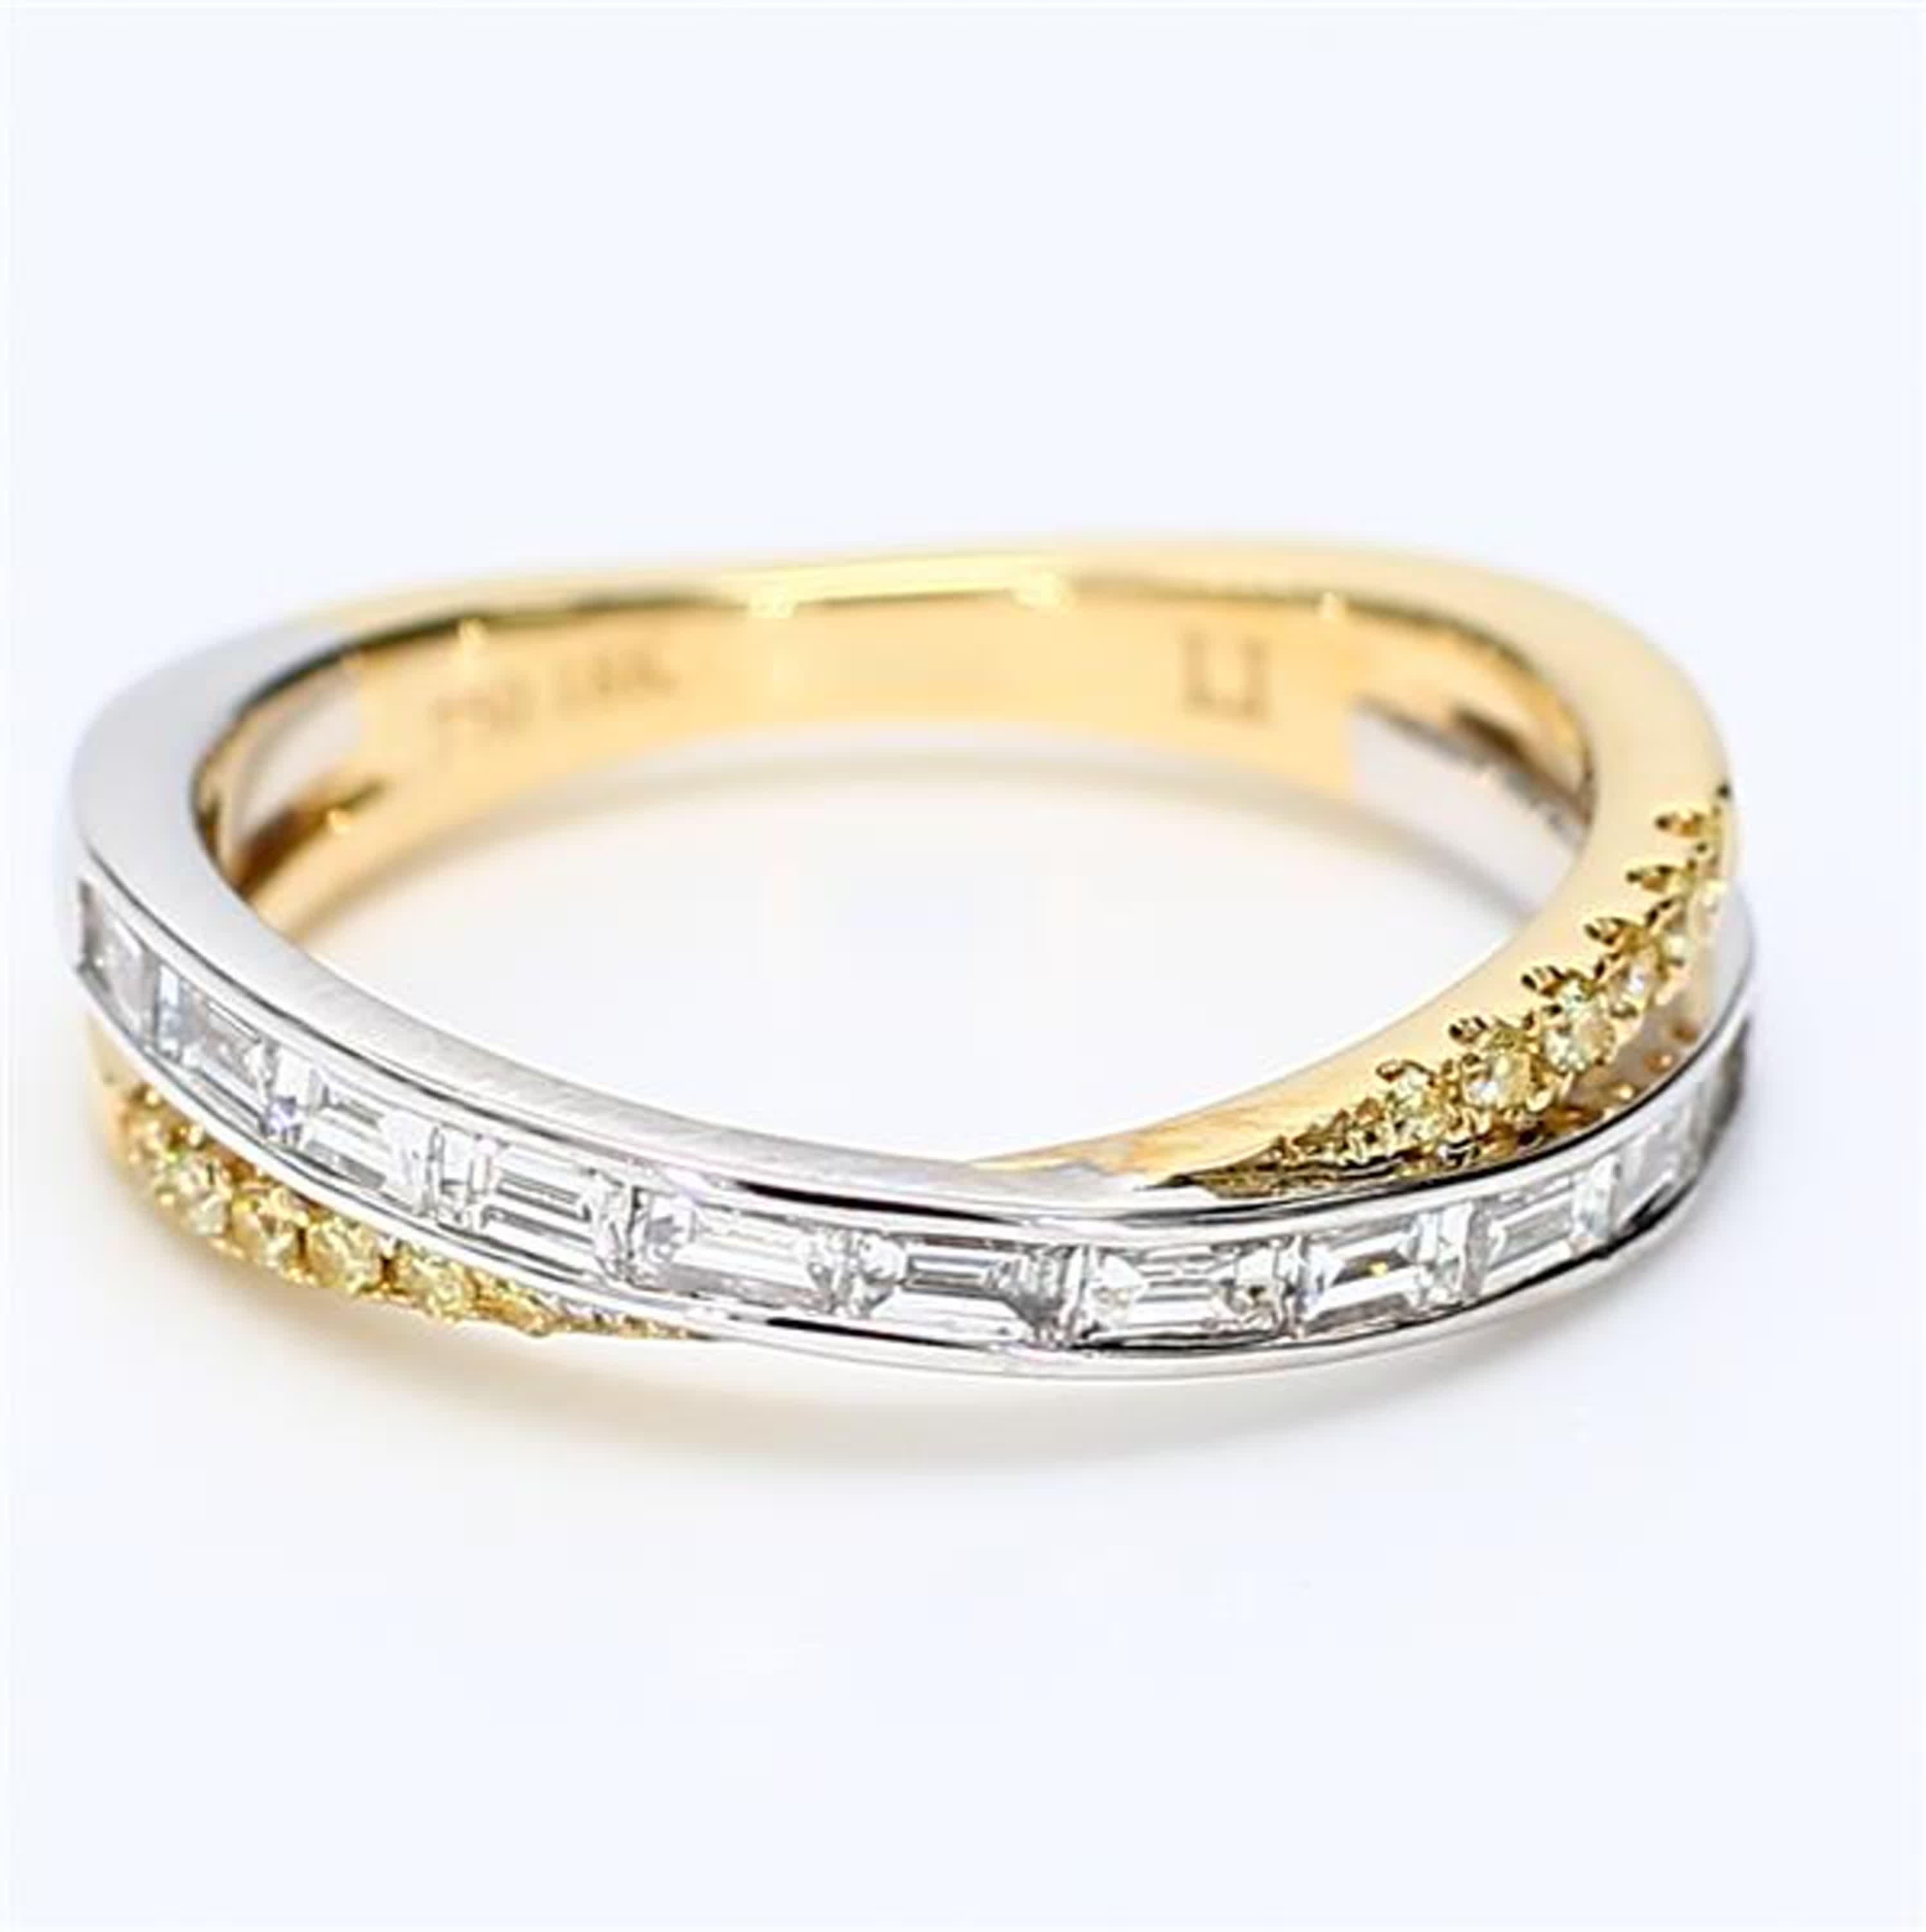 RareGemWorld's classic diamond band. Mounted in a beautiful 18K Yellow and White Gold setting with natural baguette white diamonds complimented by natural round yellow diamond melee. This band is guaranteed to impress and enhance your personal